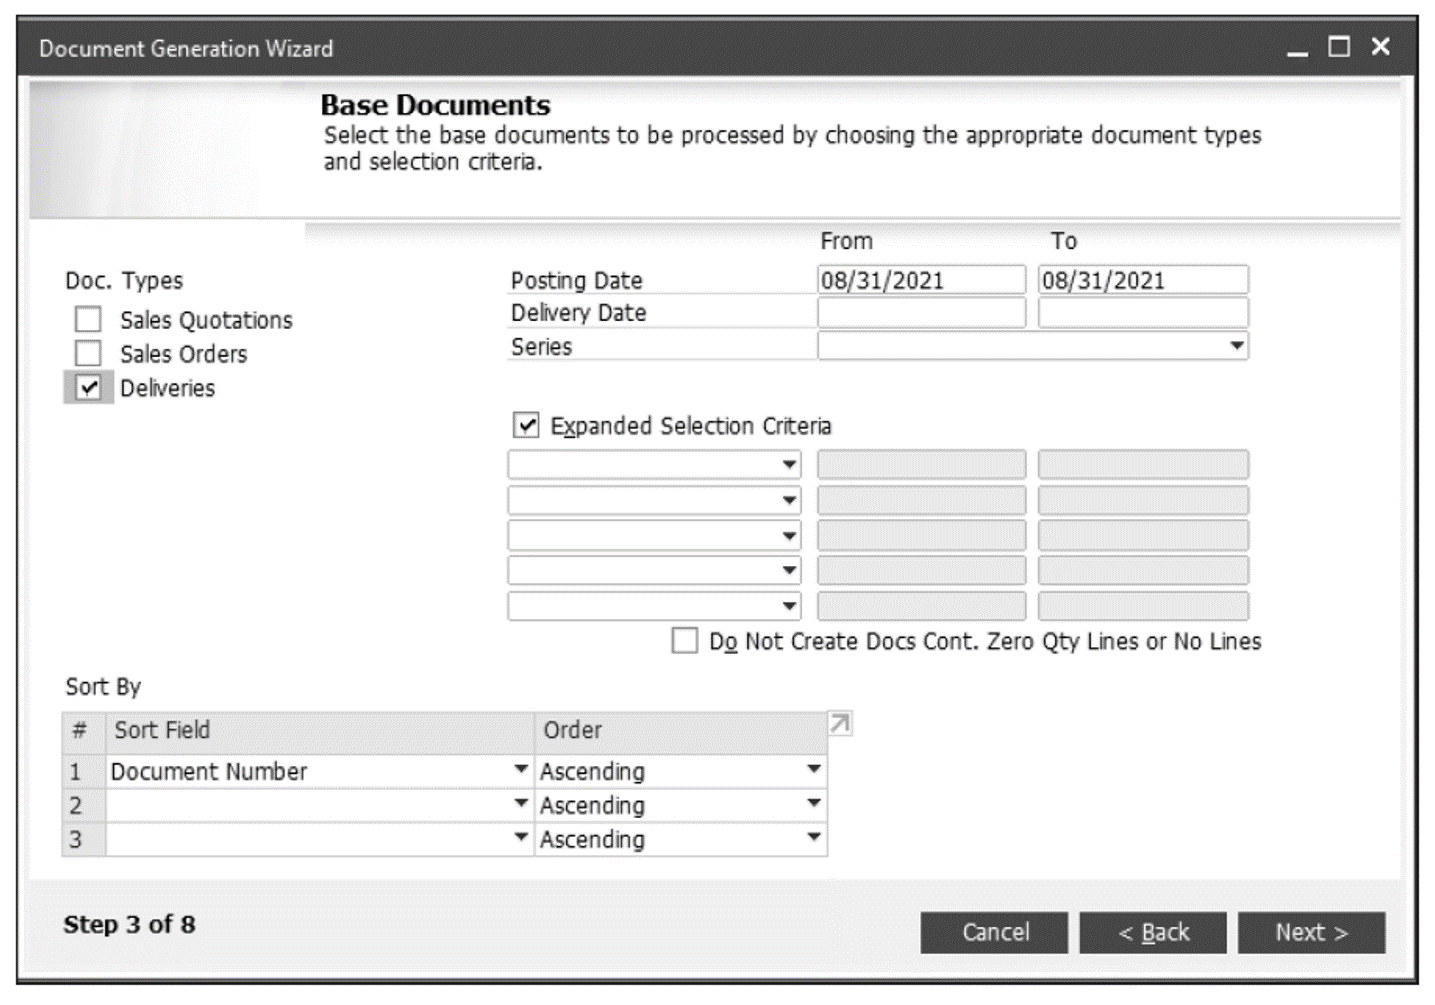 Choosing a Base Document (Step 3 of the Wizard)